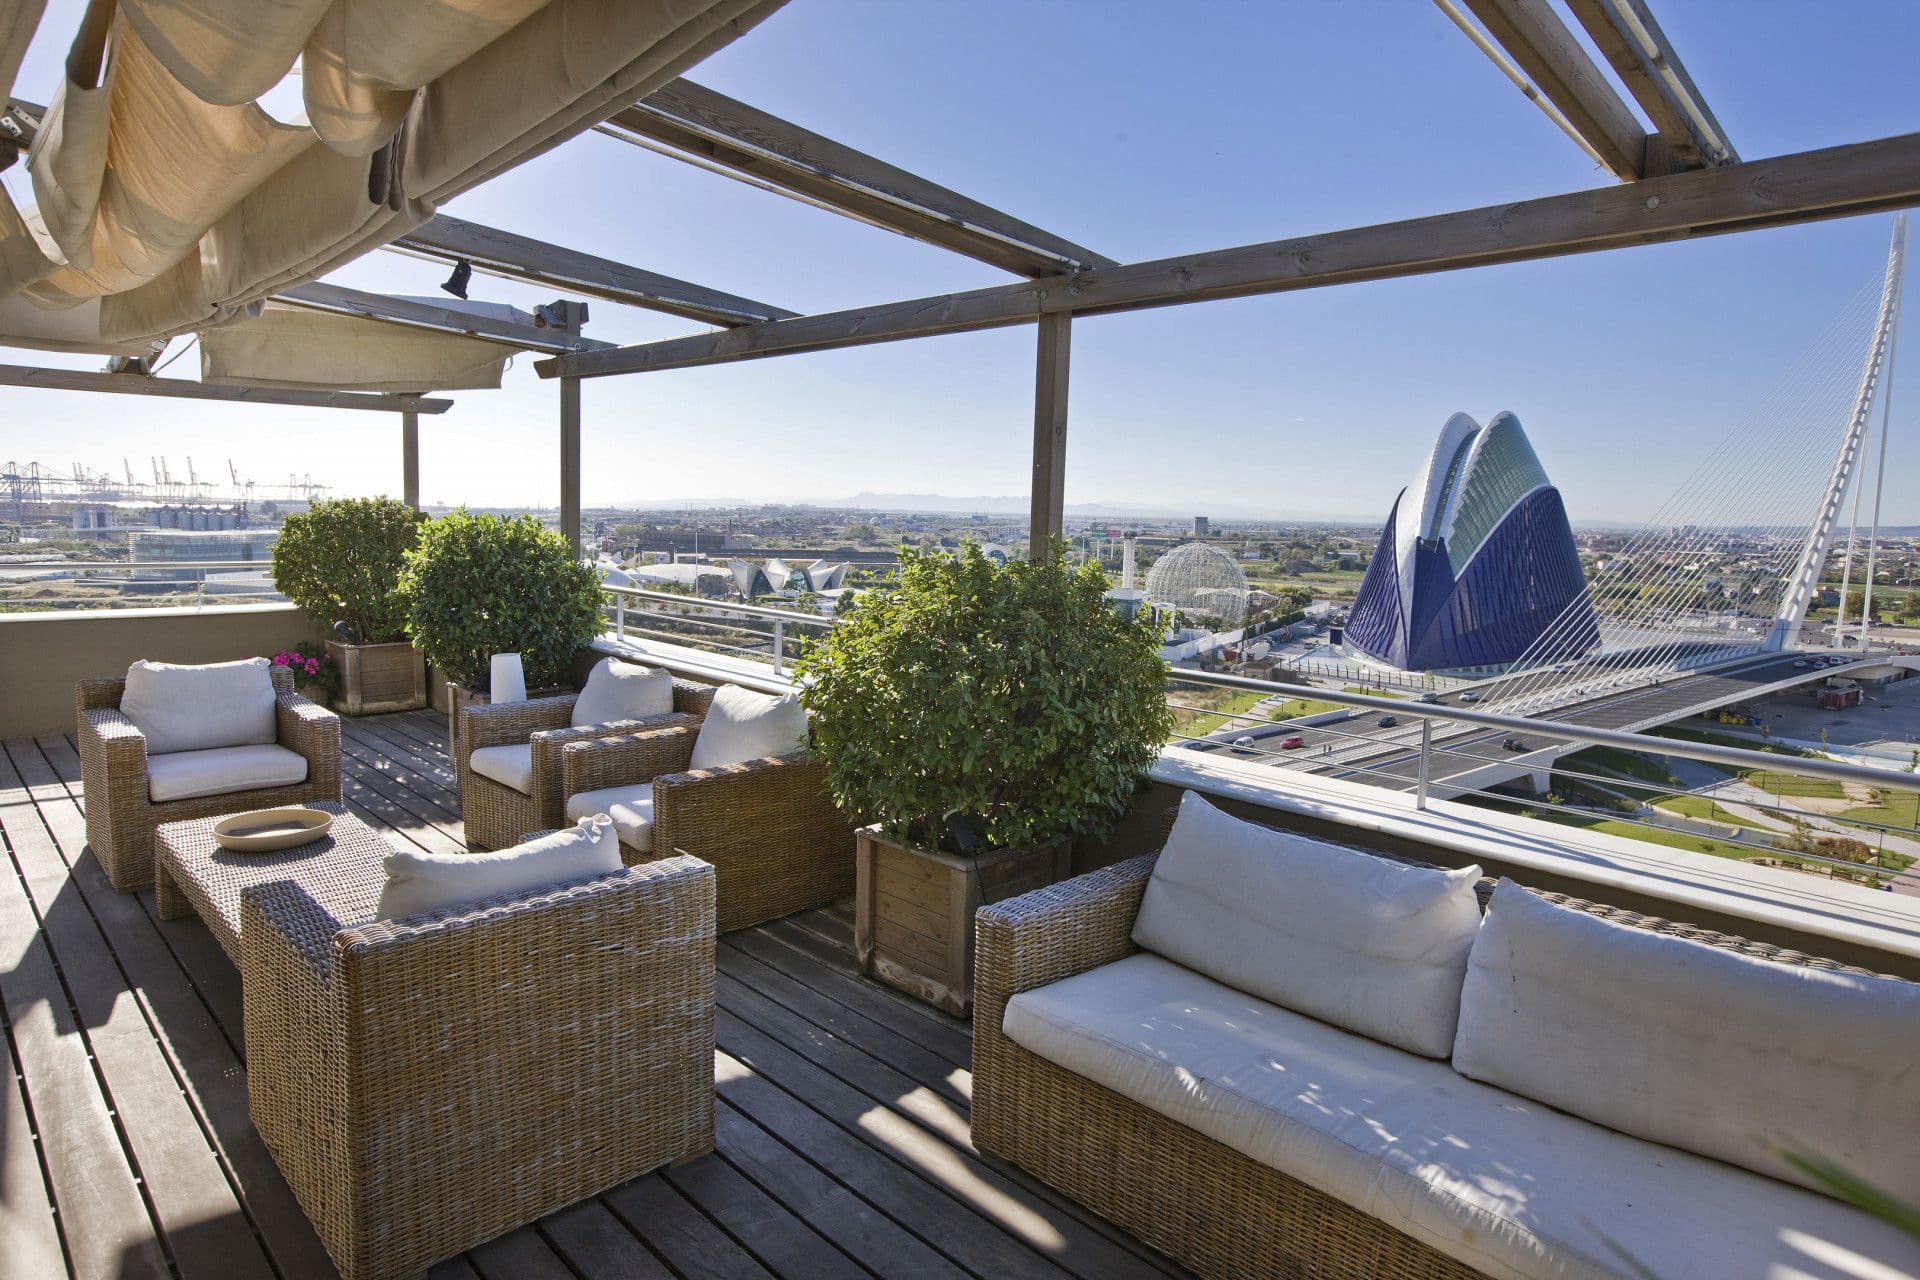 Magnificent duplex penthouse, recently renovated using high quality materials, with prime views of the City of Arts of Sciences. This luxurious three-bedroom apartment is close to all the facilities of the Rio Turia area and central Valencia.